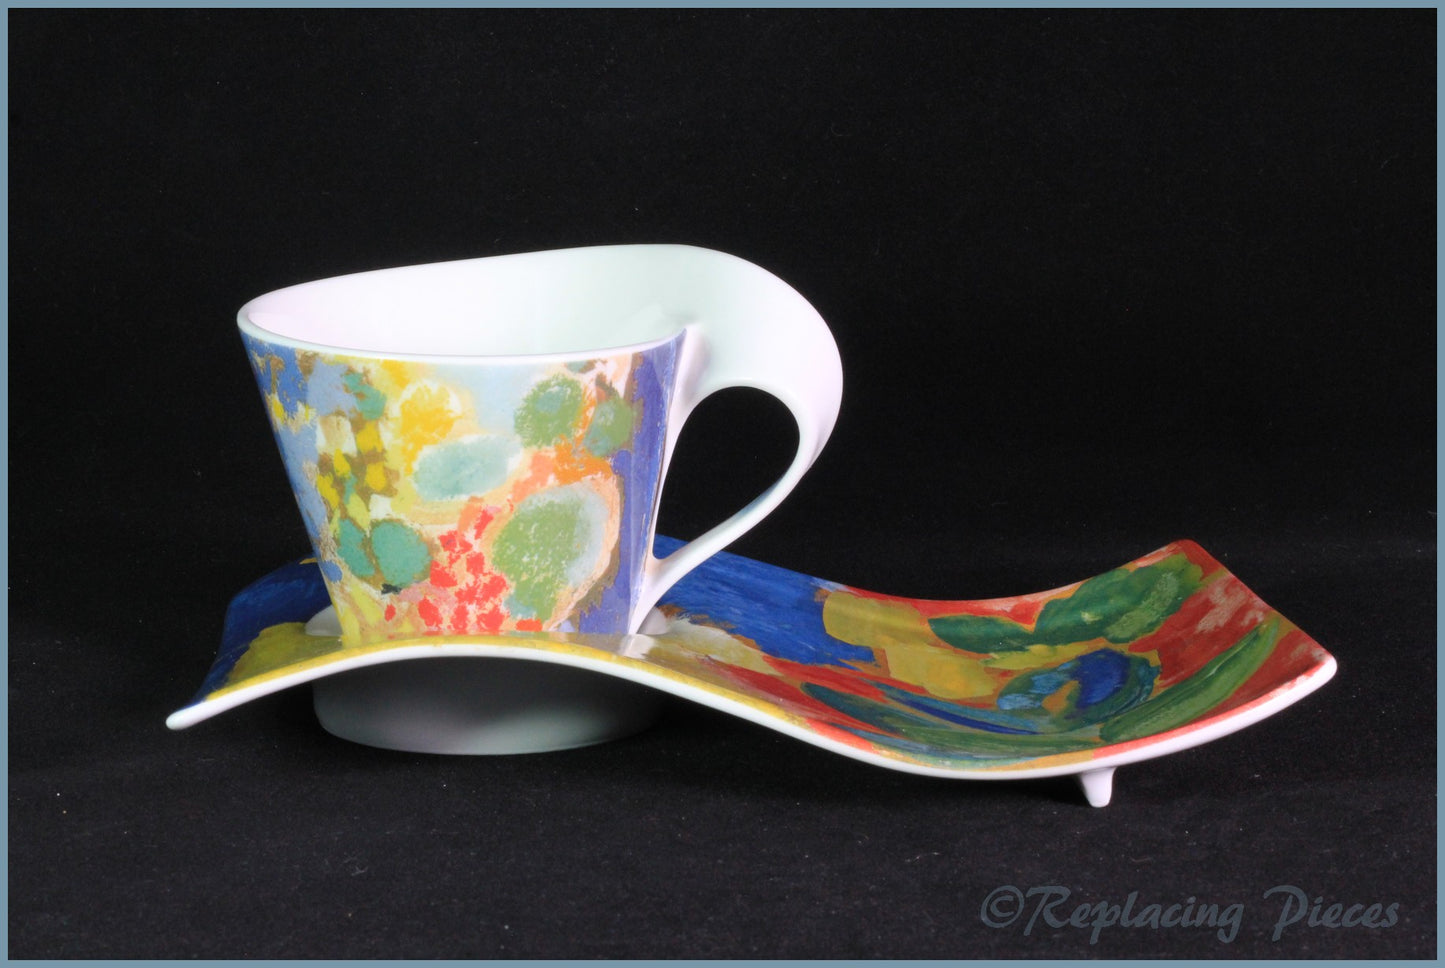 Villeroy & Boch - New Wave (Impression) - Party Plate & Teacup